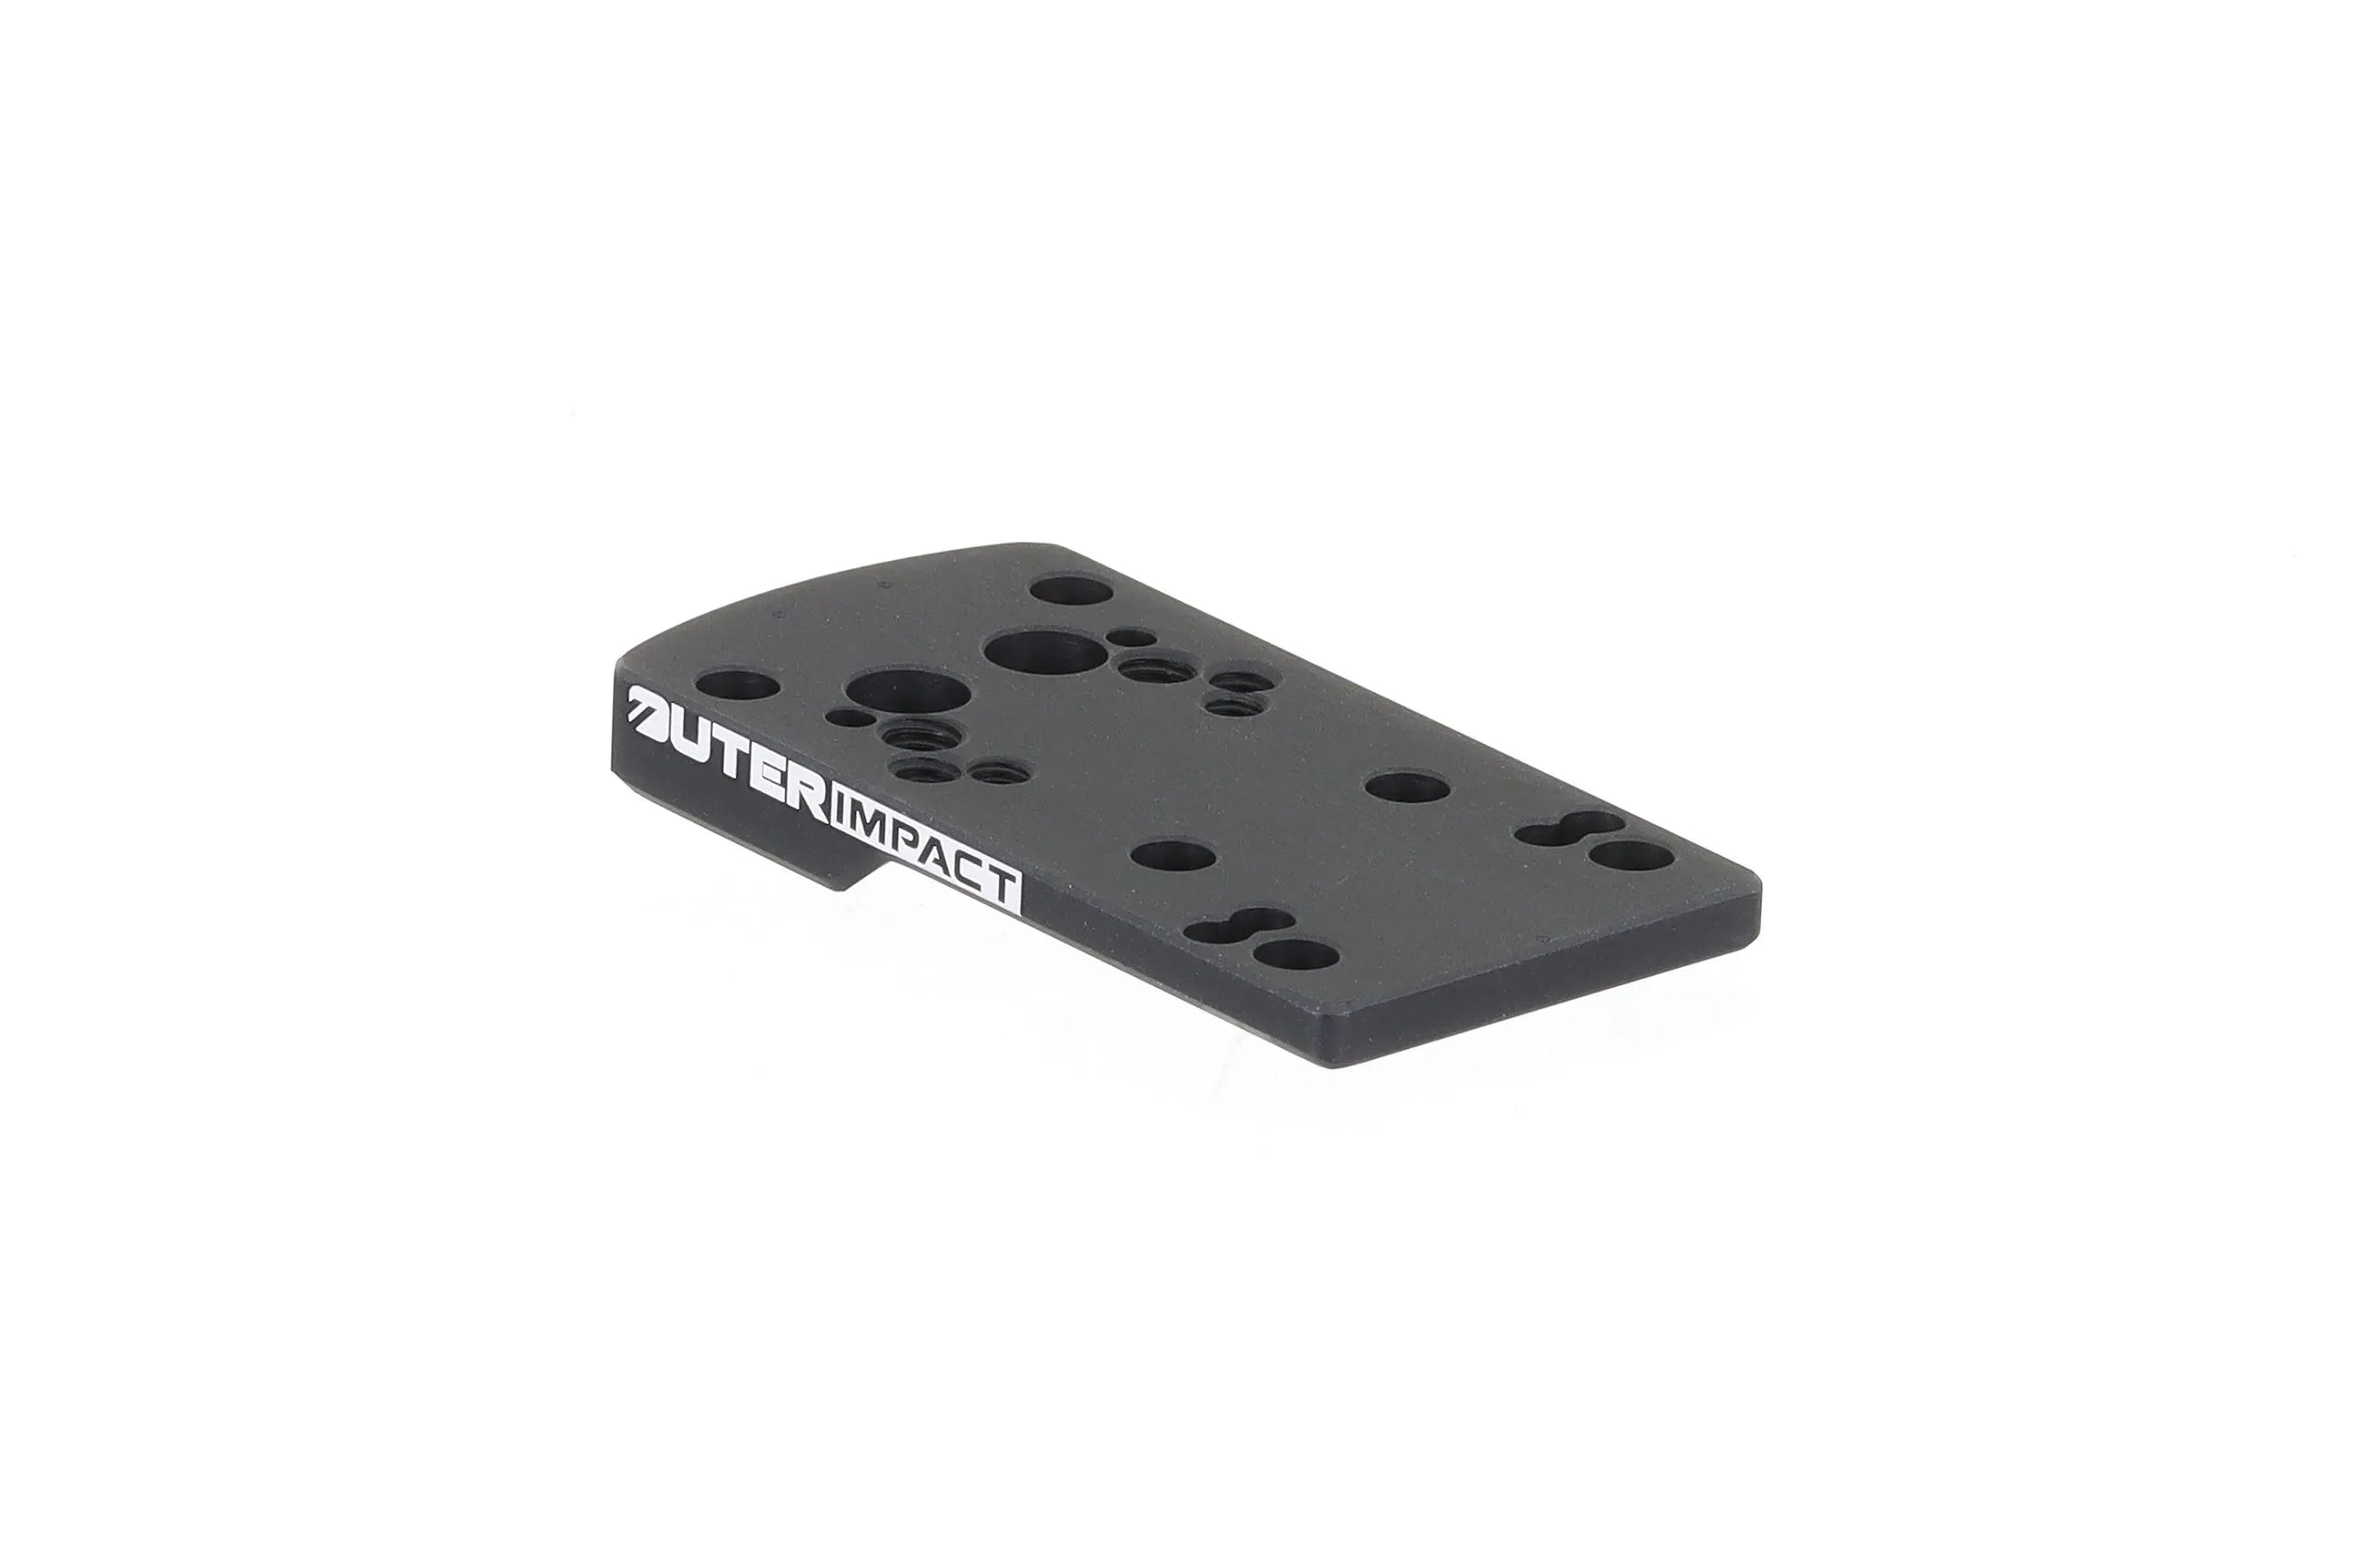 Heckler and Koch VP9 Pistol Red Dot Adapter Mount Plate - OuterImpact